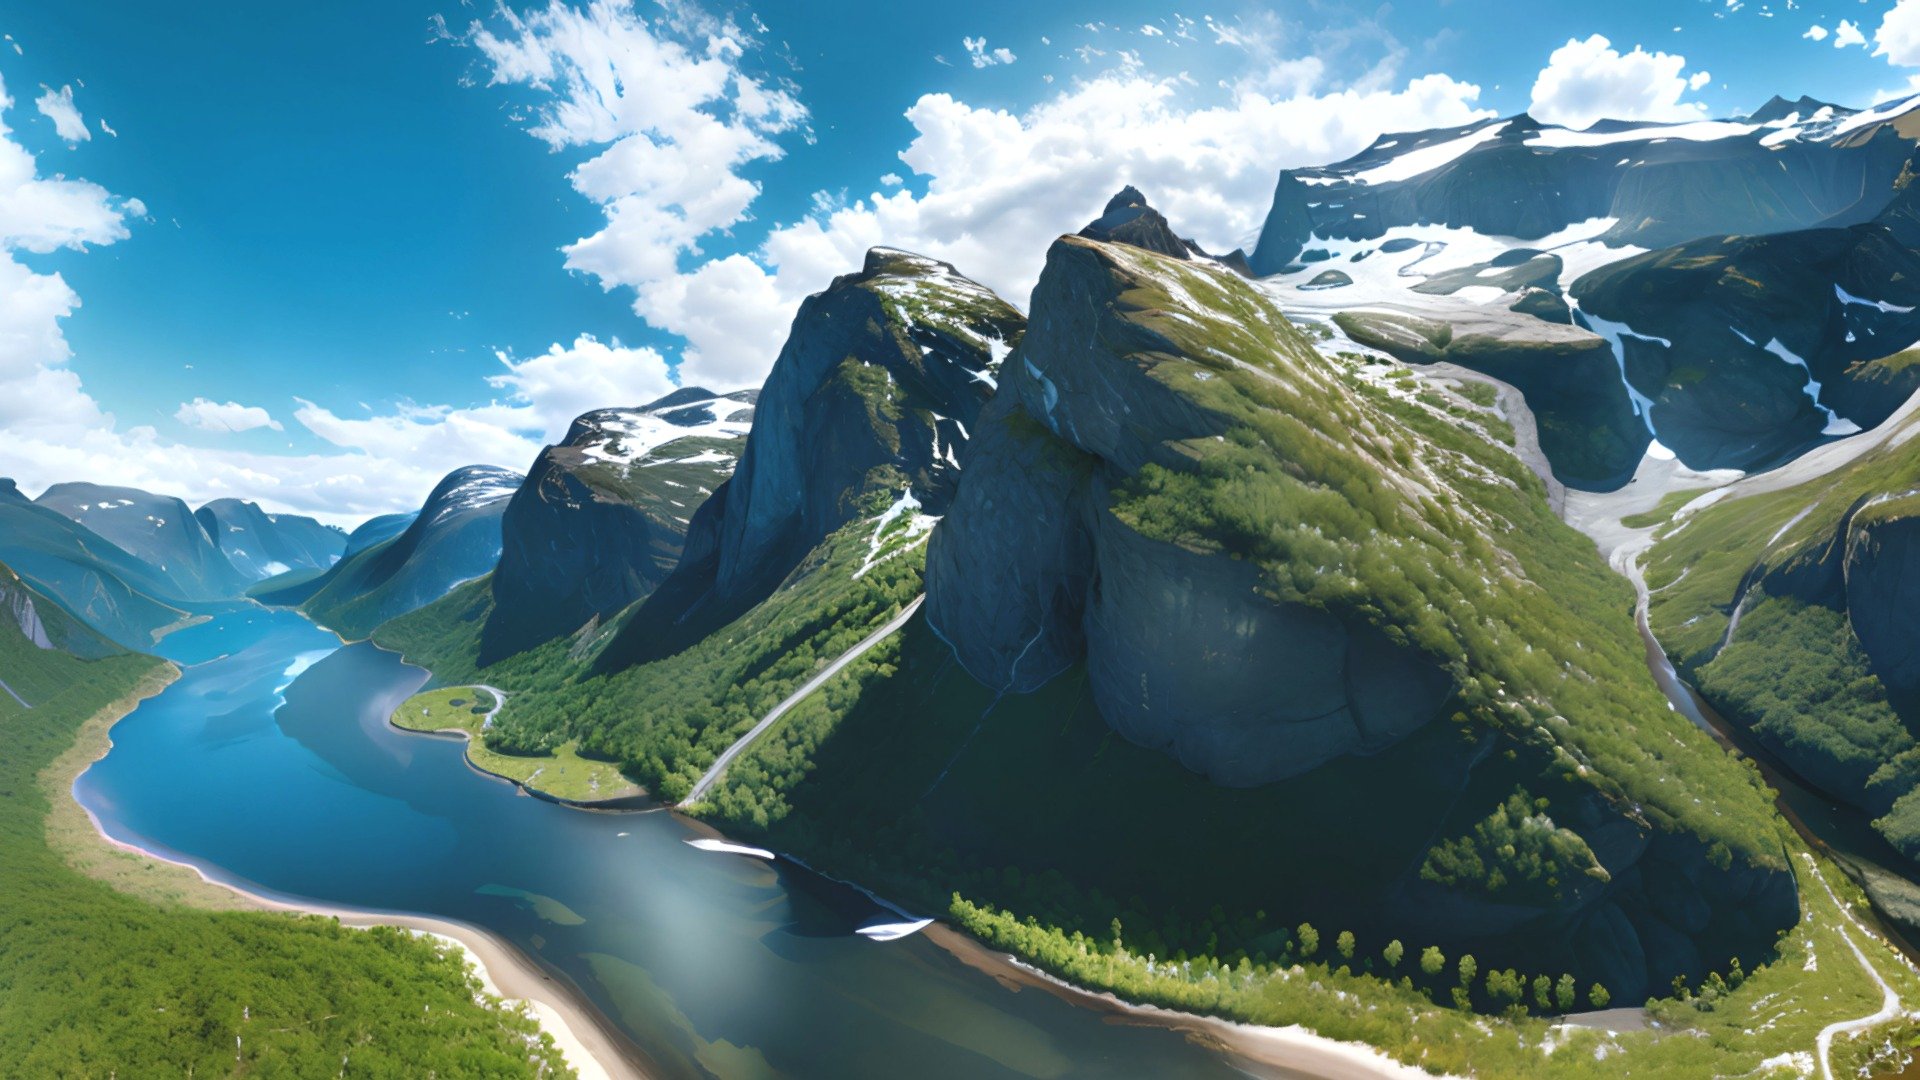 This pack contains 16 different HDRI equirectangular panoramas which will help you create 360 degrees spherical Natural Landscapes backgrounds in different 3d software (Blender, Unreal Engine, Unity, 3dMax and many others). It is perfect for games, virtual reality, 3d renders, movies etc. All images were created with AI and edited in different 2d and 3d software to improve quality, remove seams and make them perfect for any 3d or 2d Forest or Natural landscape project.

Texture formats: HDR and JPG;
Number of unique textures: 16;
Number of 3d models: 1; 
Texture resolutions: 8k (8192 x 4096); - HDRI Forest & Landscape Panoramas Megapack Vol.1 - Buy Royalty Free 3D model by Ionut81 3d model